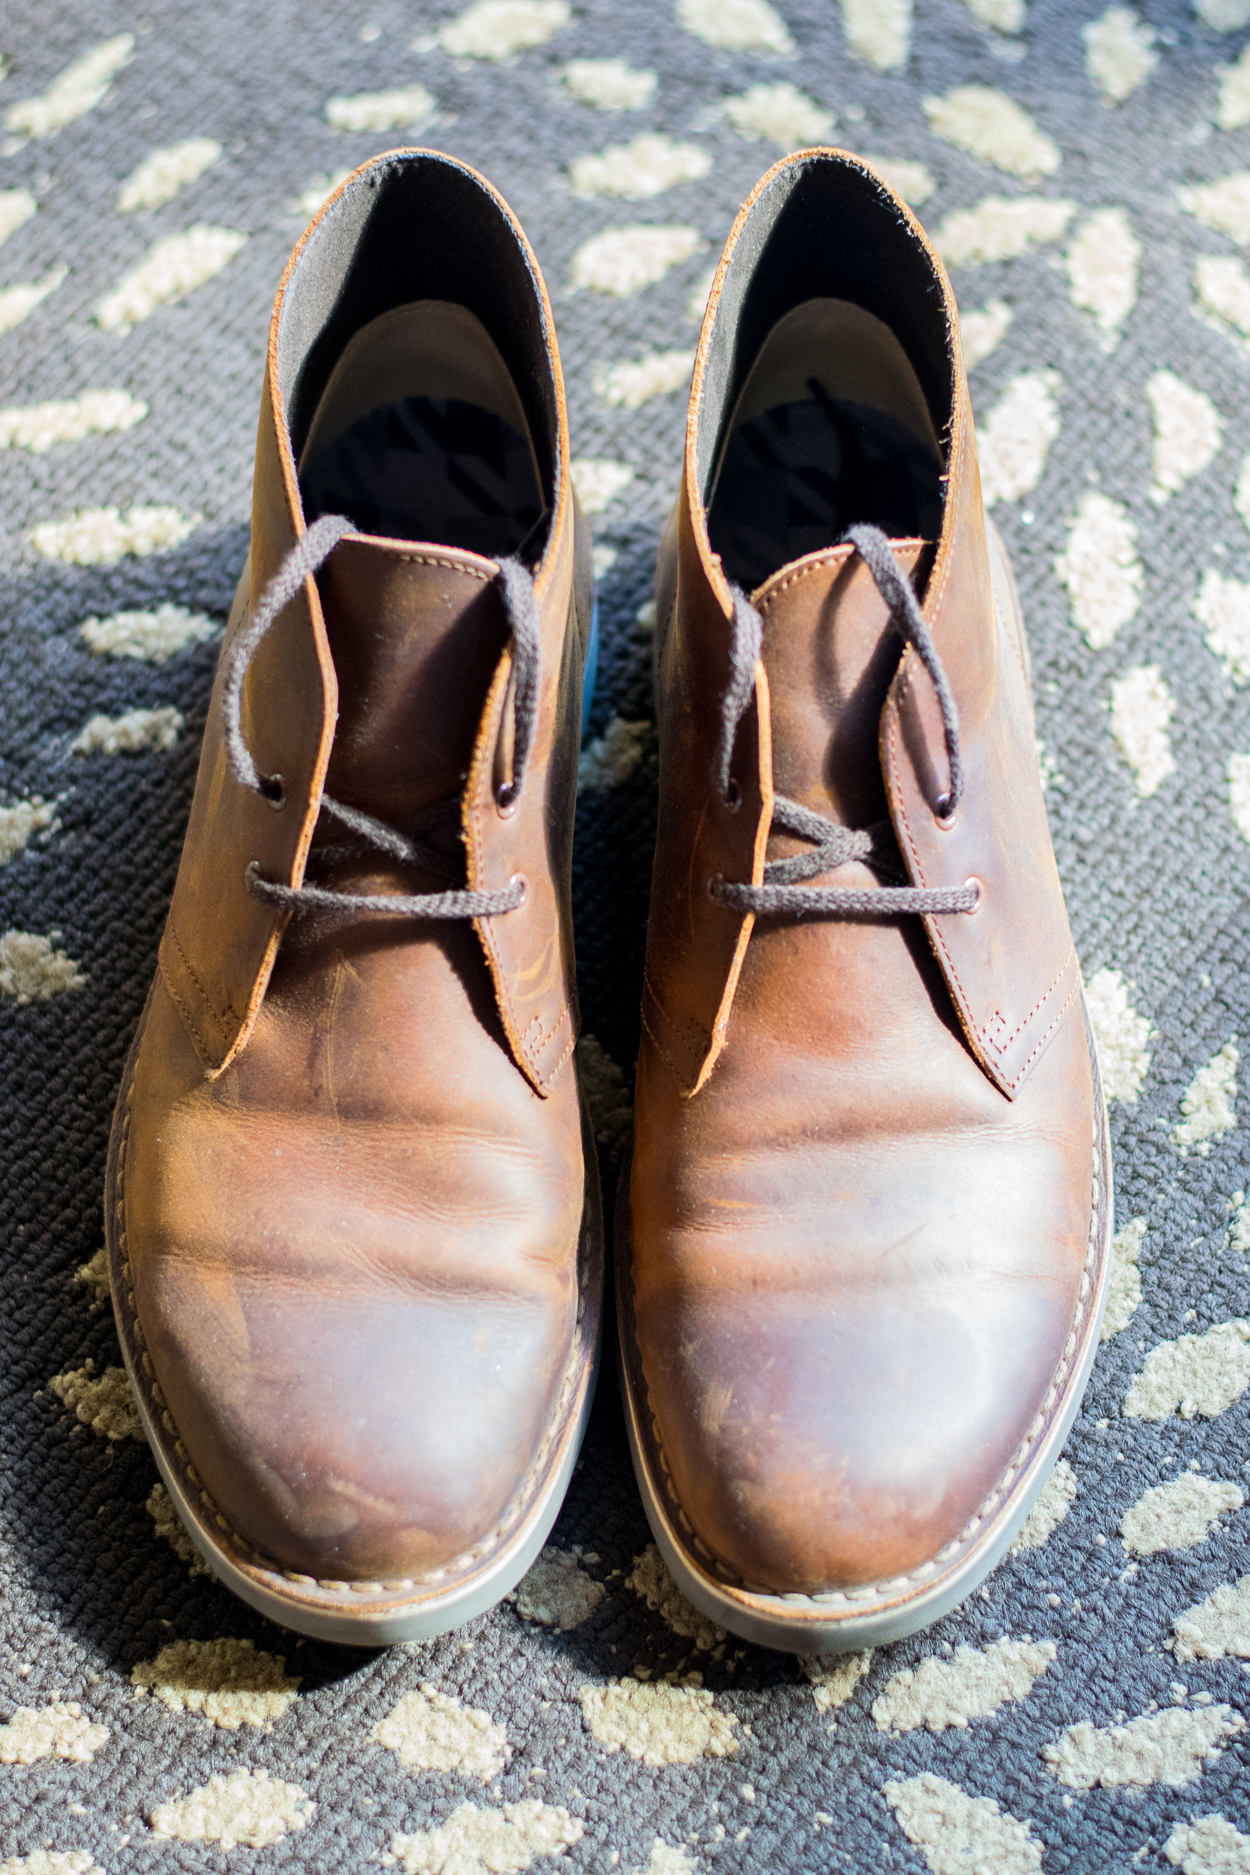 Groom's shoes in a Charleston hotel.